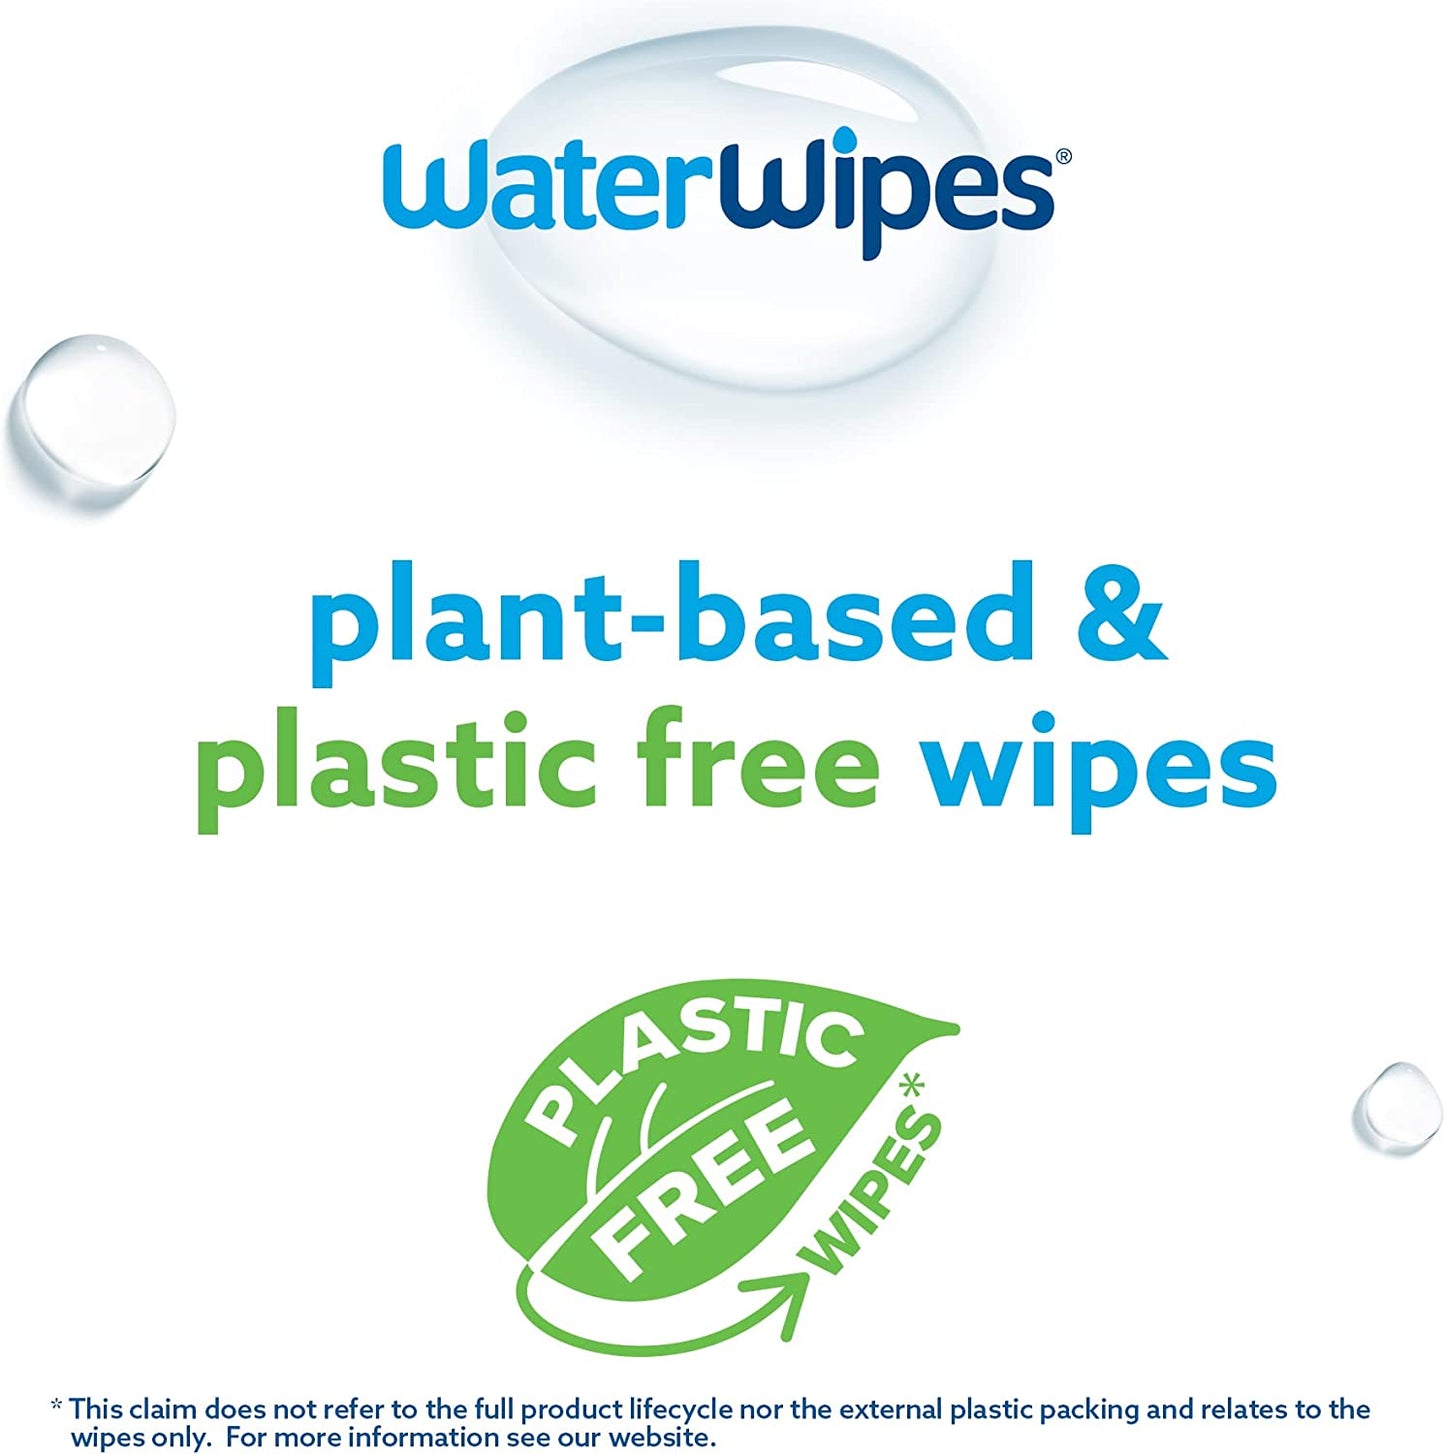 WaterWipes Original Plastic Free Baby Wipes, 540 Count (9 packs x 60 wipes)